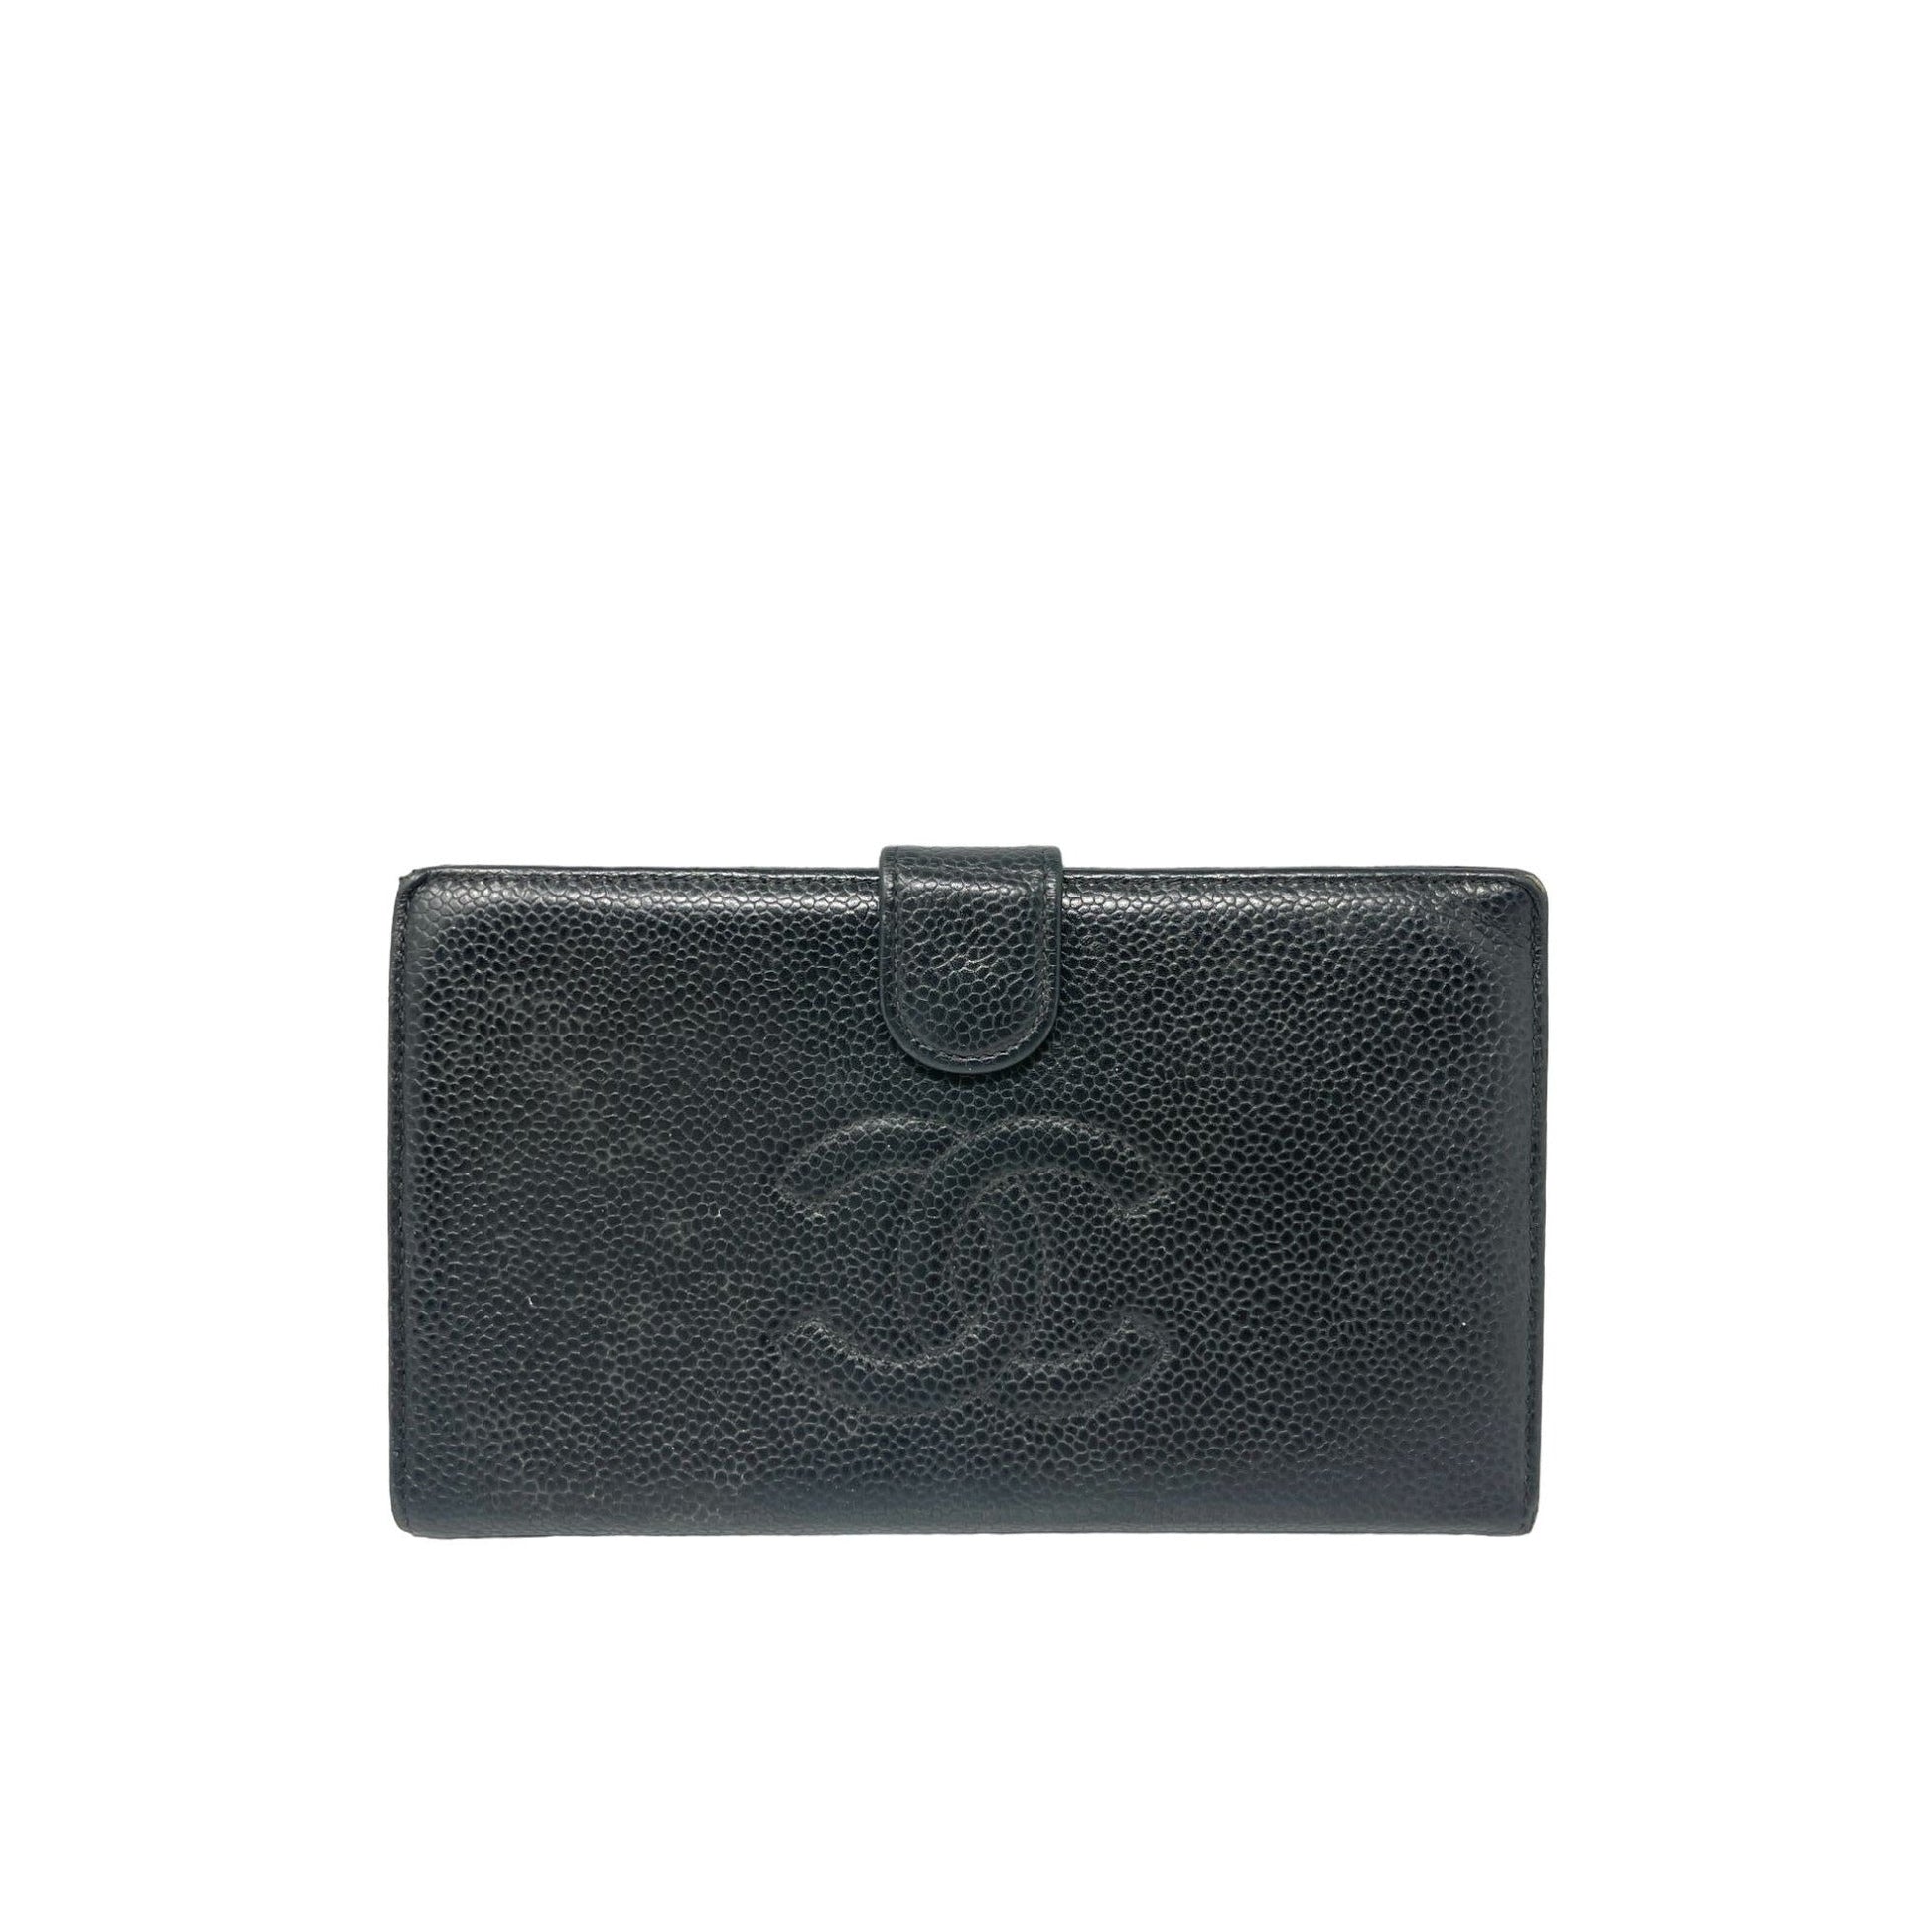 CHANEL Chanel Timeless Caviar Continental Wallet - Black